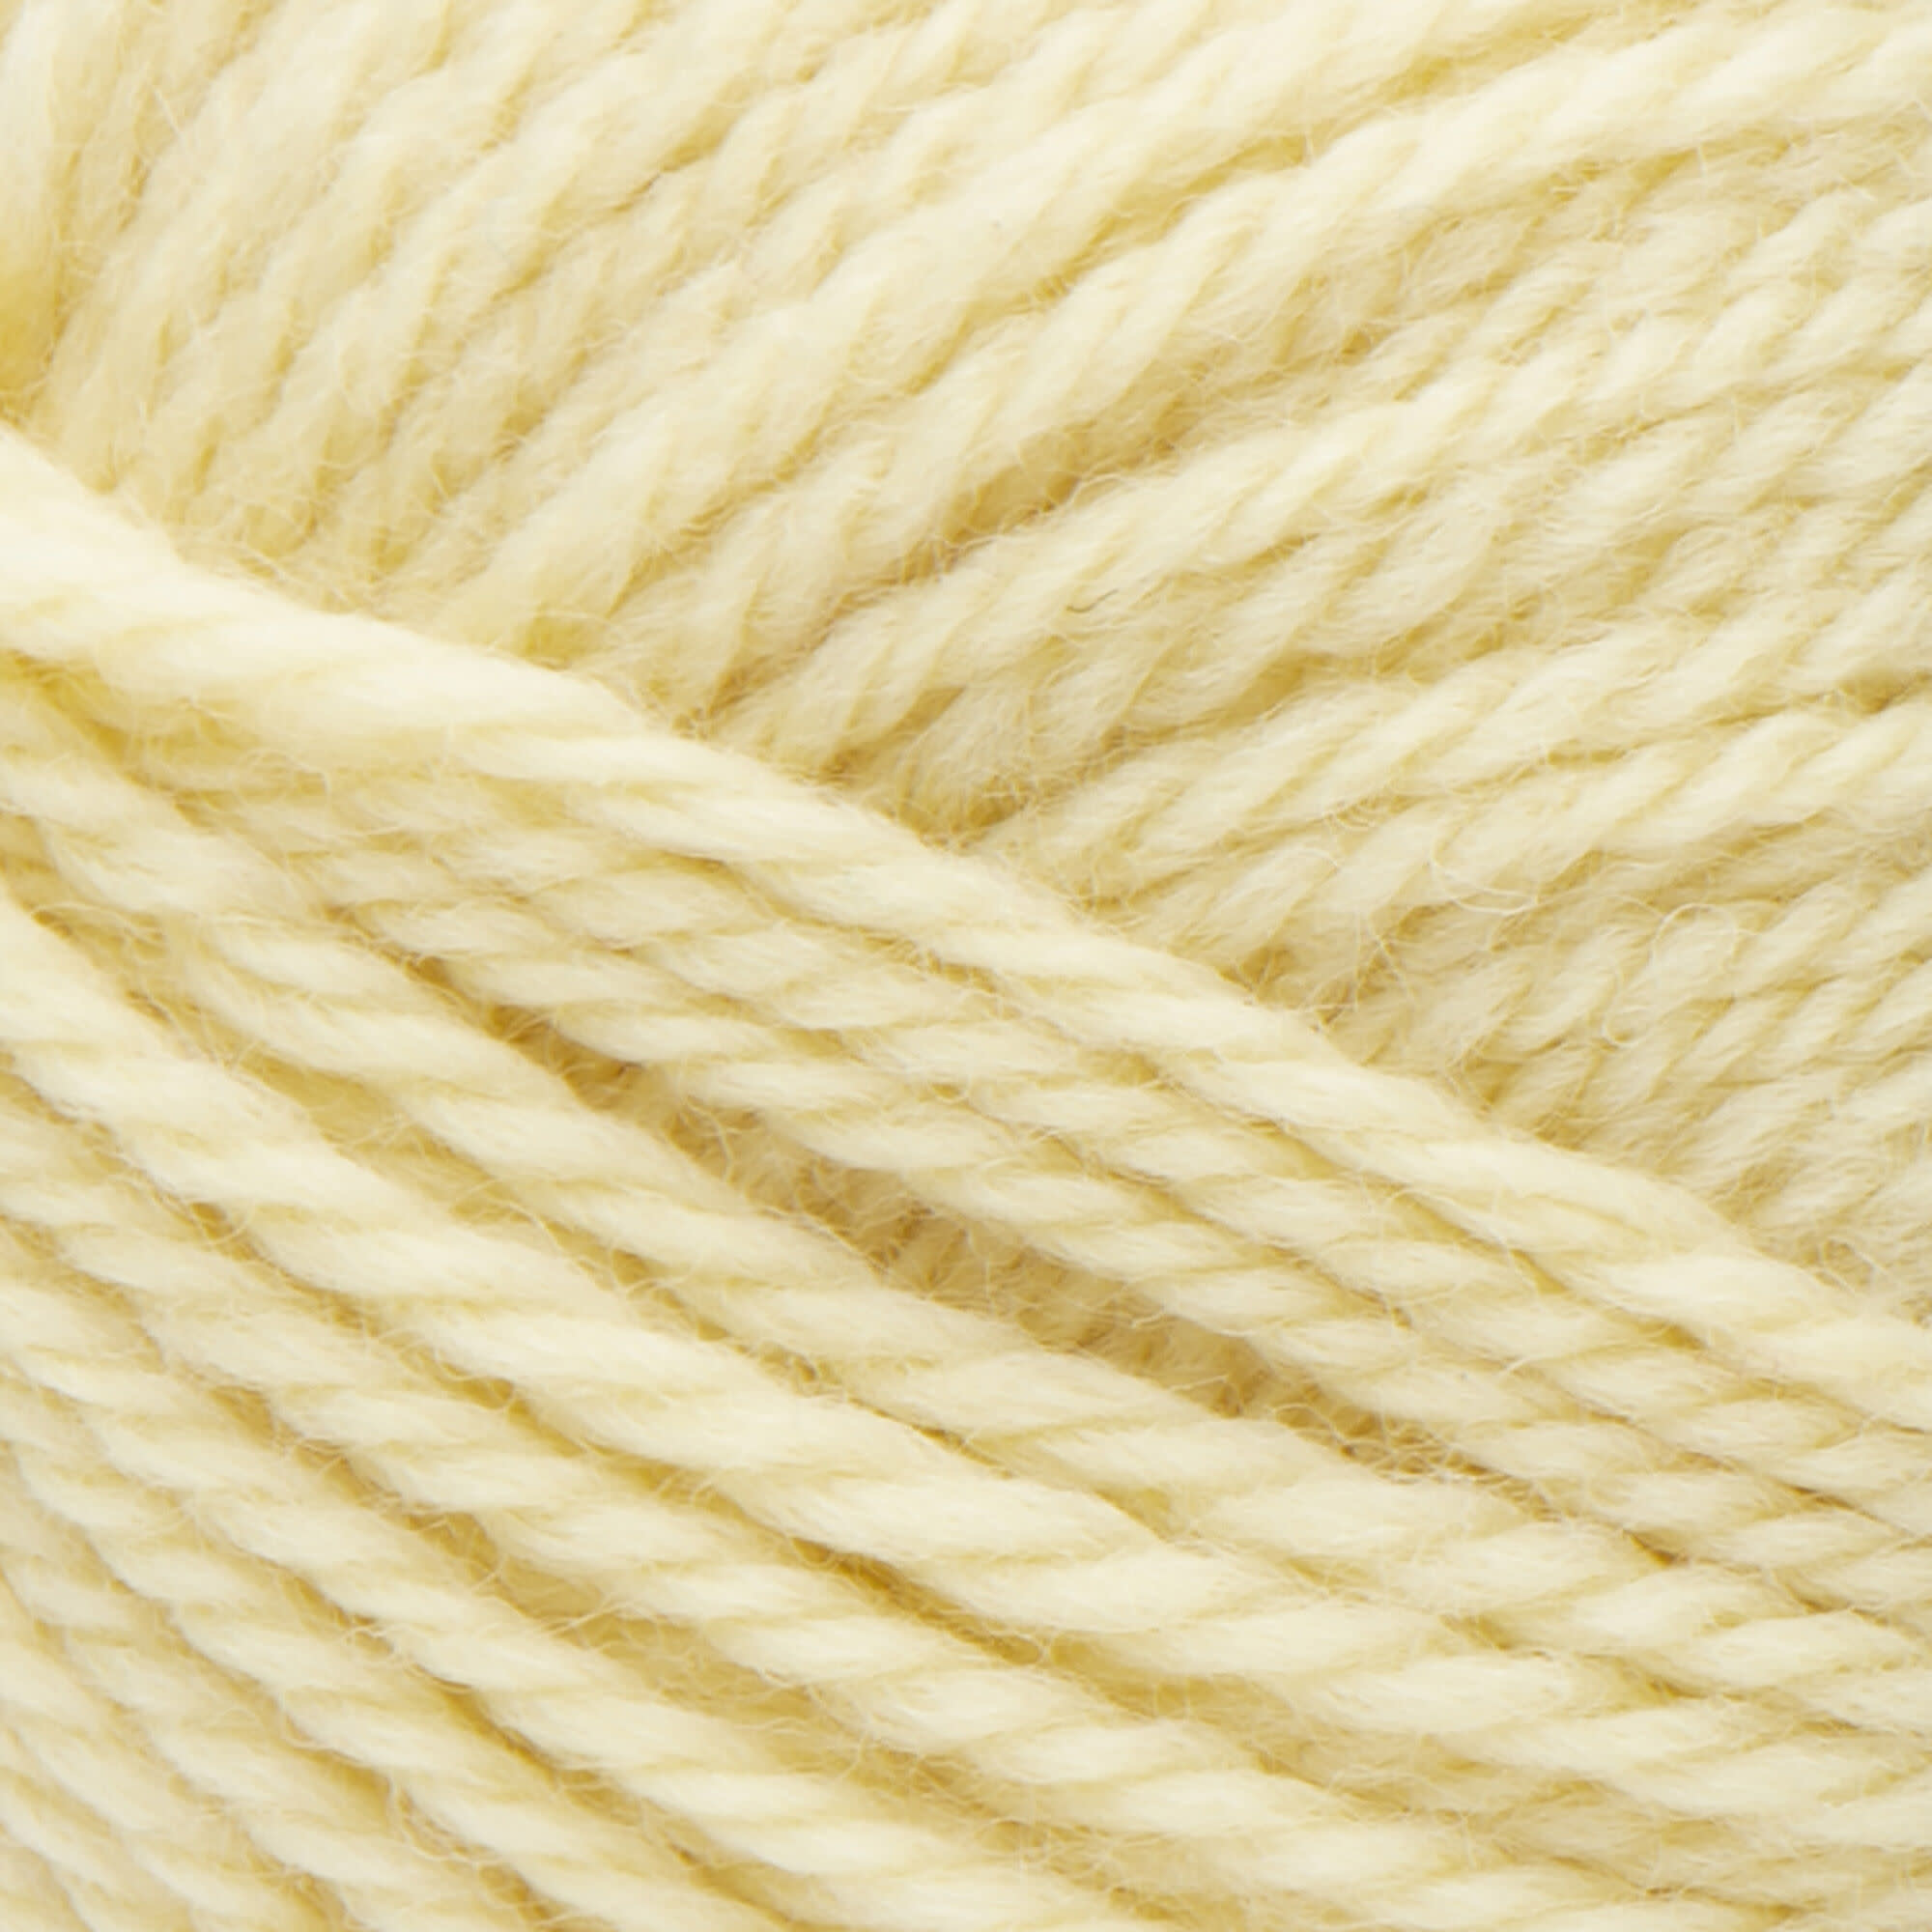 Patons Classic Wool Worsted - Soft Sunshine/754